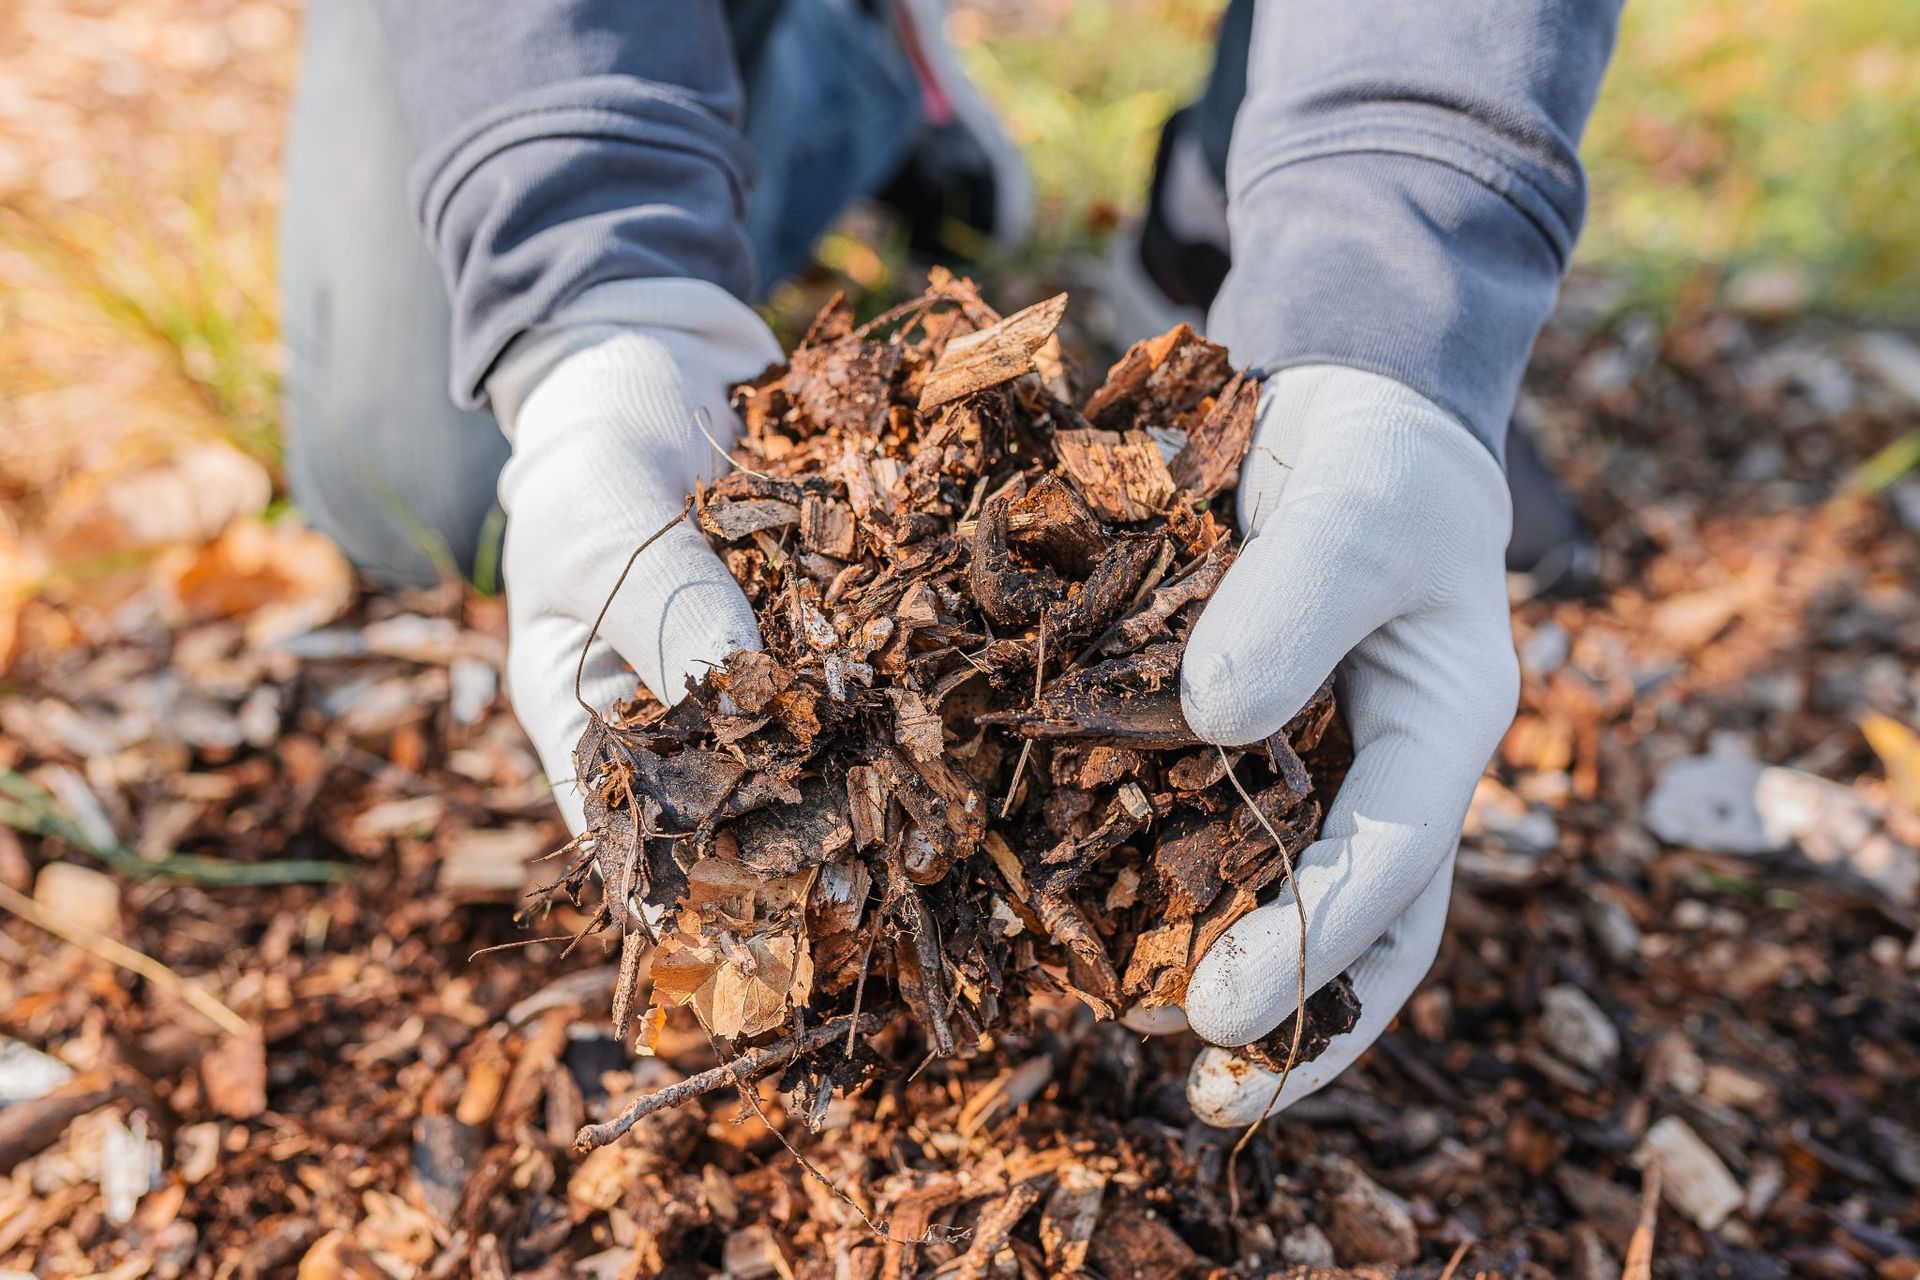 This image shows someone picking up mulch with gloves because it is dirty mulch